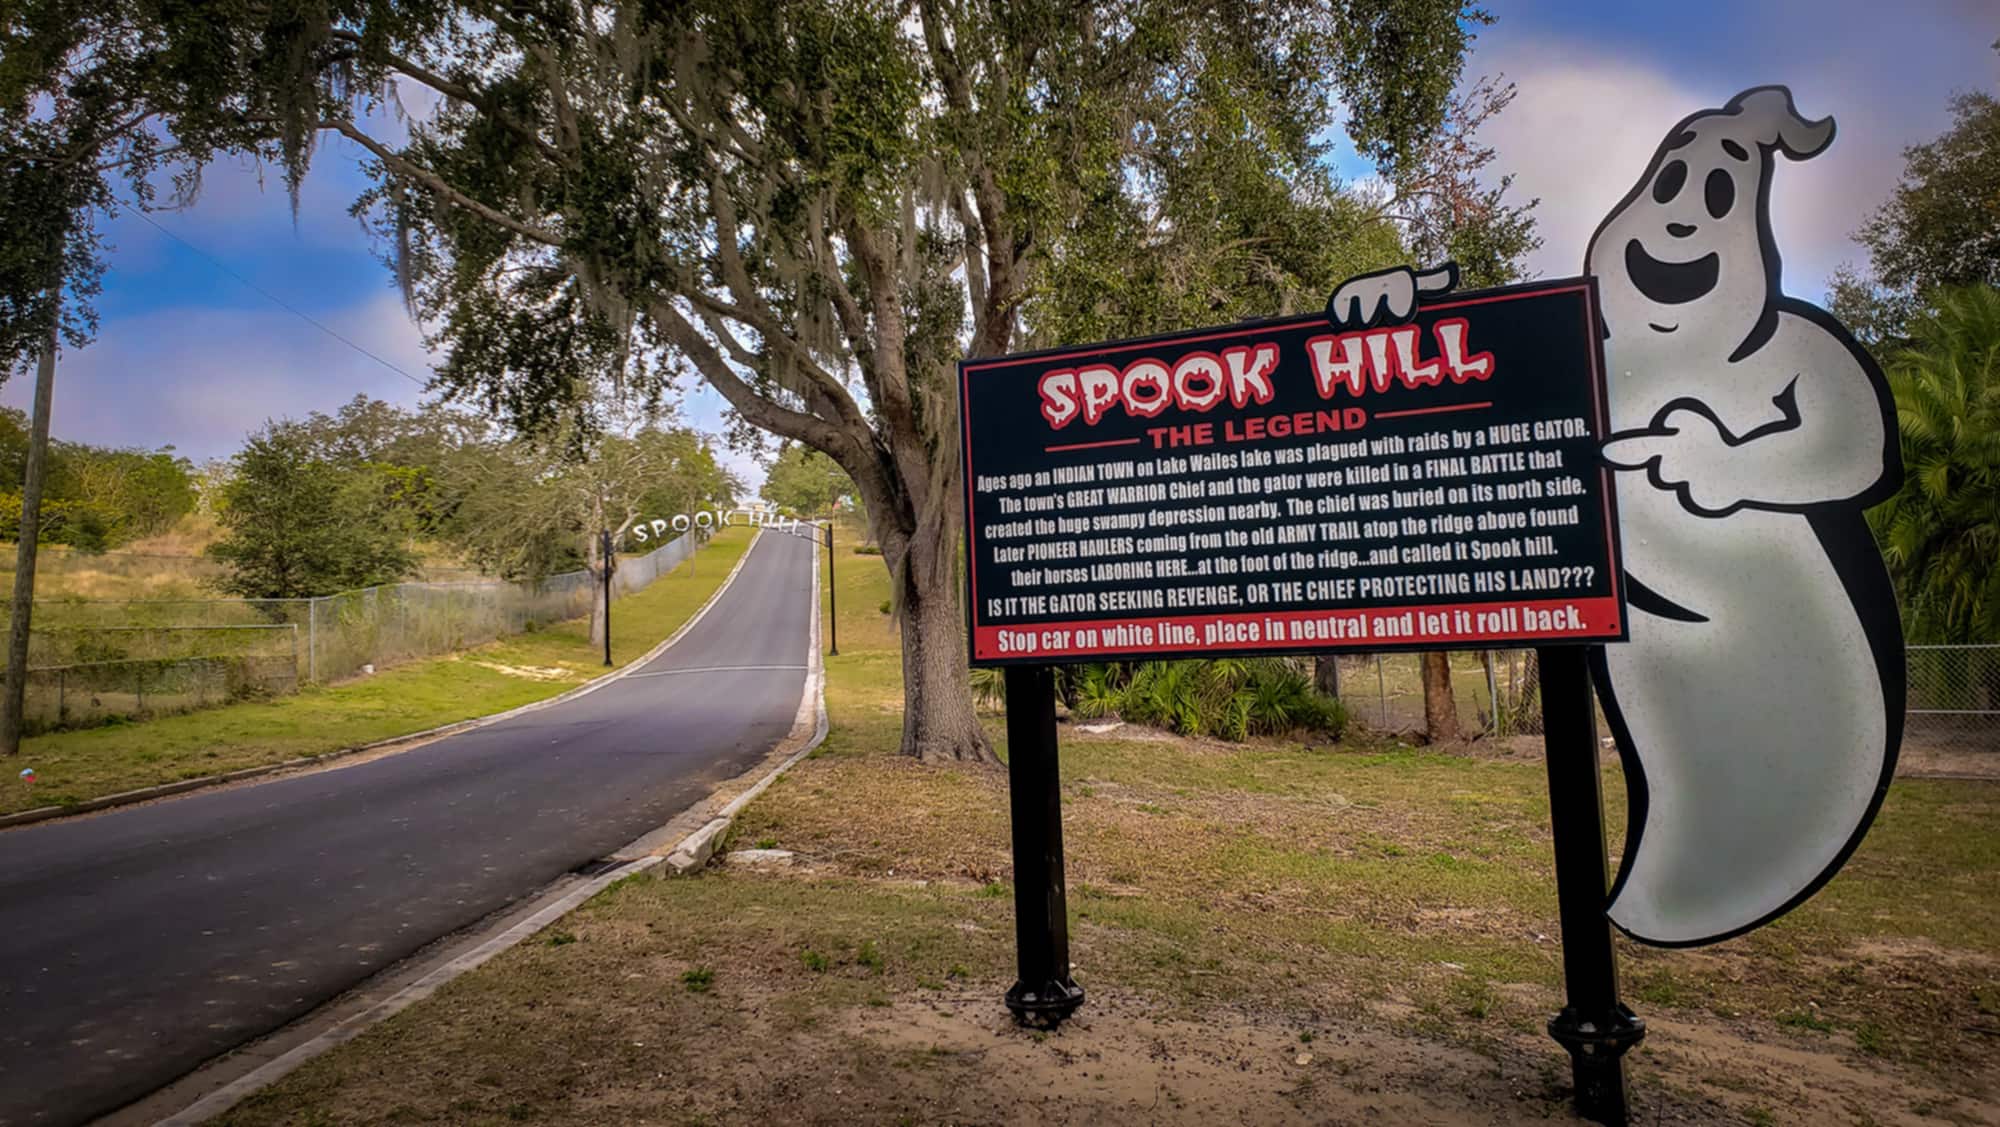 Road and sign explaining history of Spook Hill in Lake Wales, FL